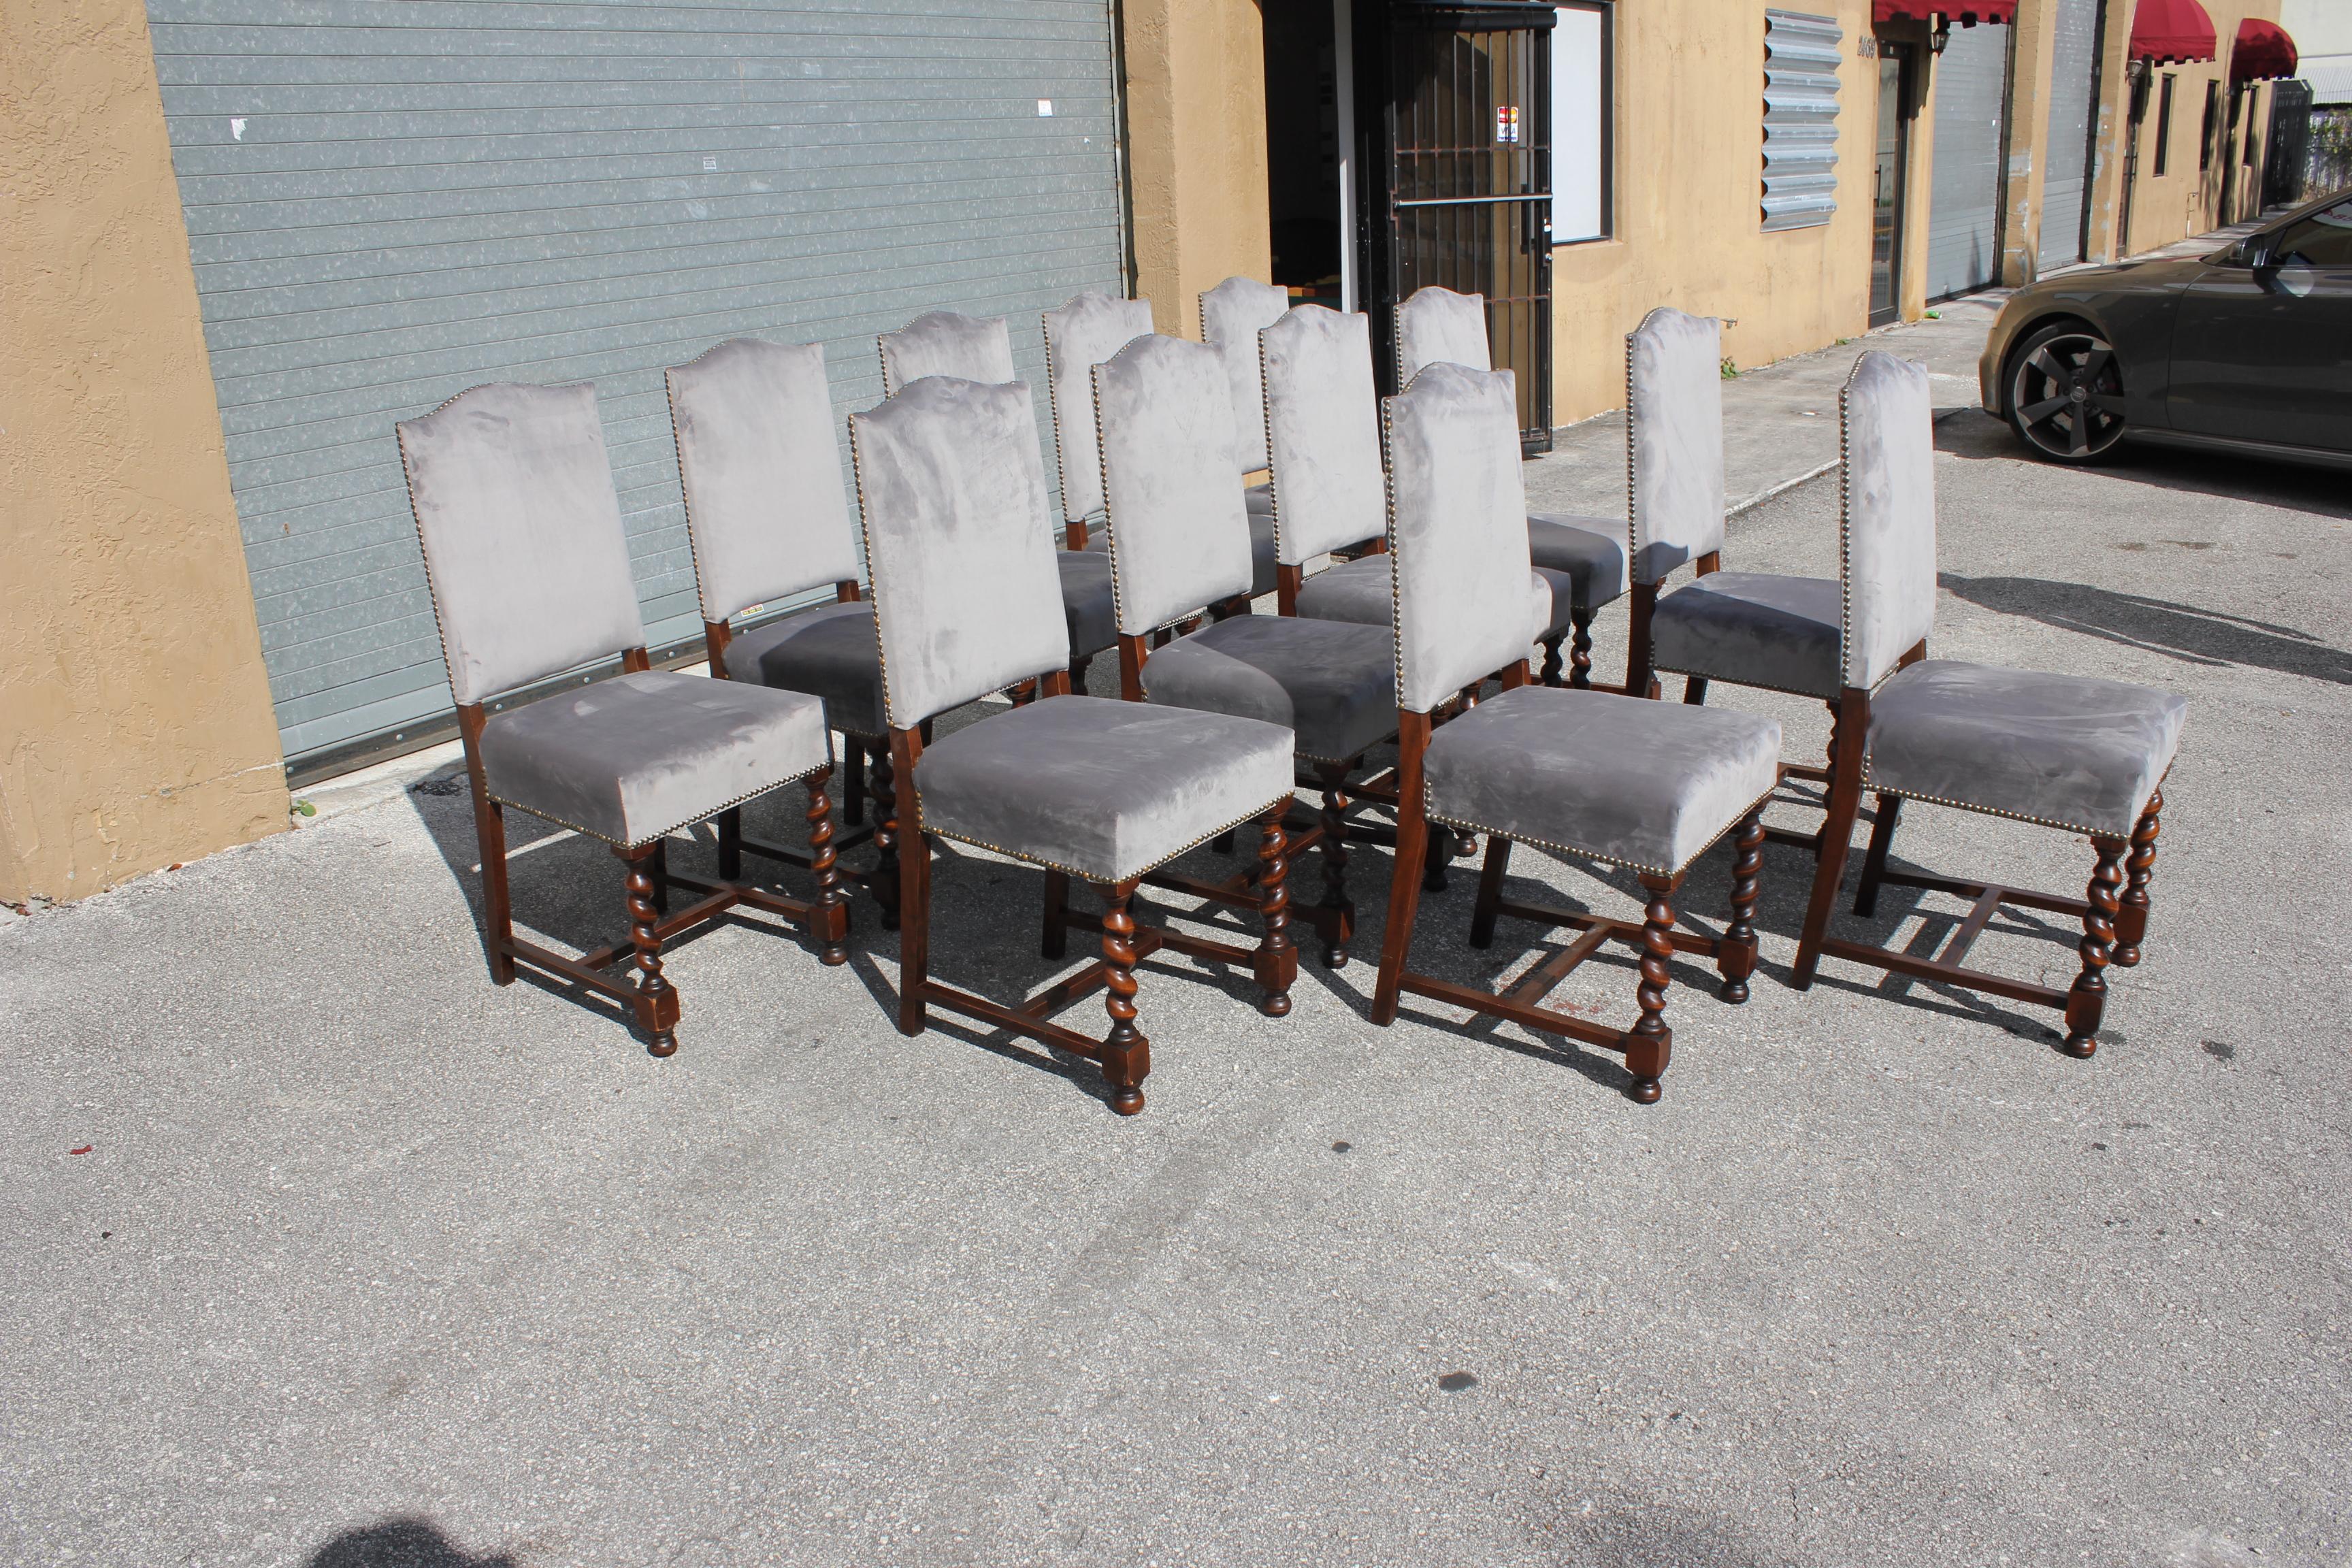 Fine set of 12 Louis XIII style barley twist dining chairs with chapeau de gendarme backs, circa 1900s? With a deep rich patina, these comfortable chairs are solid and very sturdy, ready for everyday use. Newly upholstered with a beautiful gray